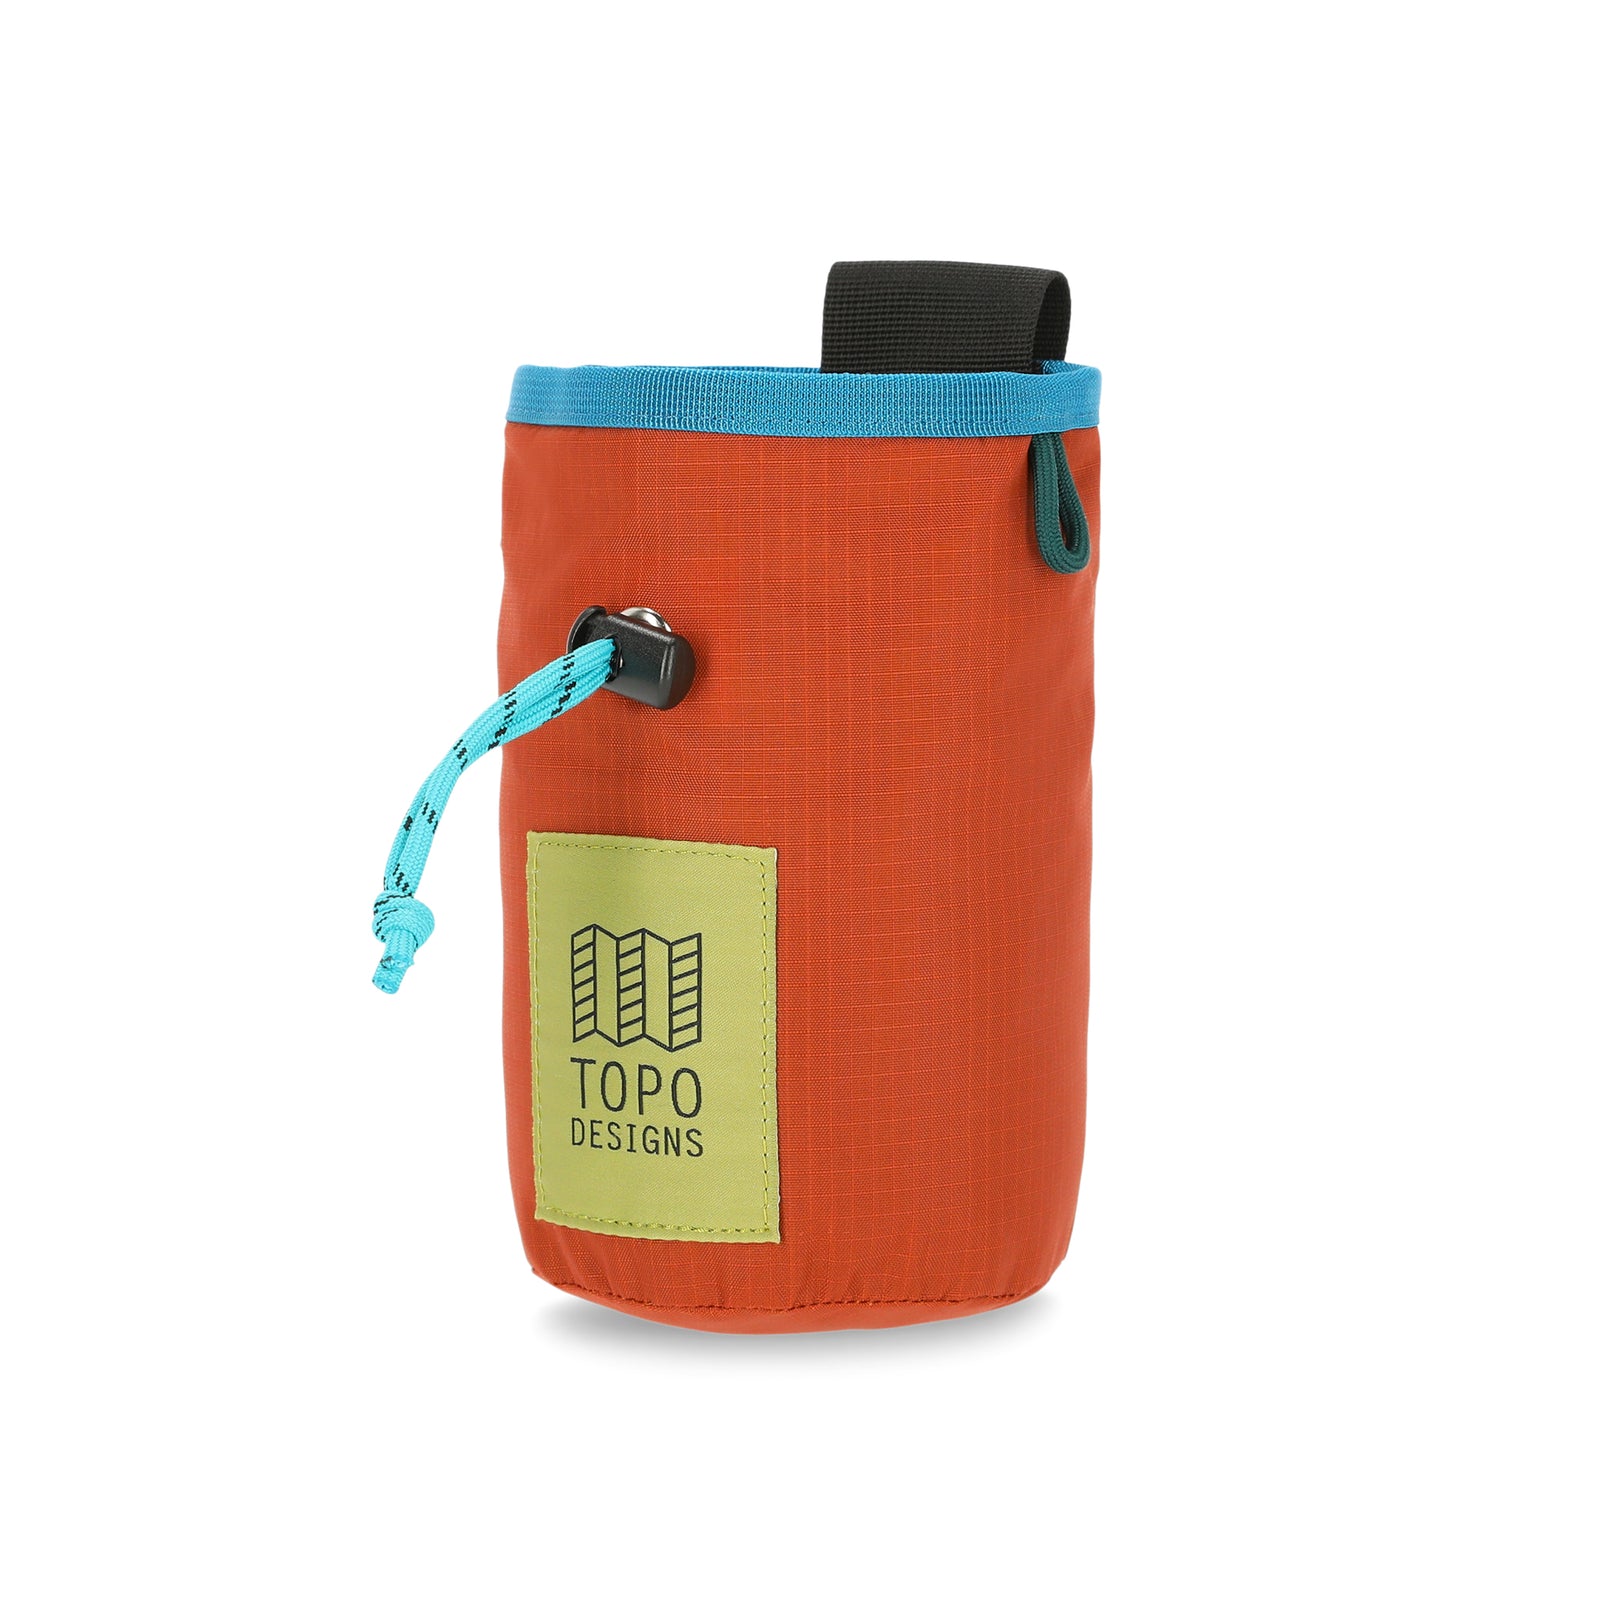 Topo Designs Mountain Chalk Bag for rock climbing and bouldering in lightweight recycled "Clay" orange nylon.